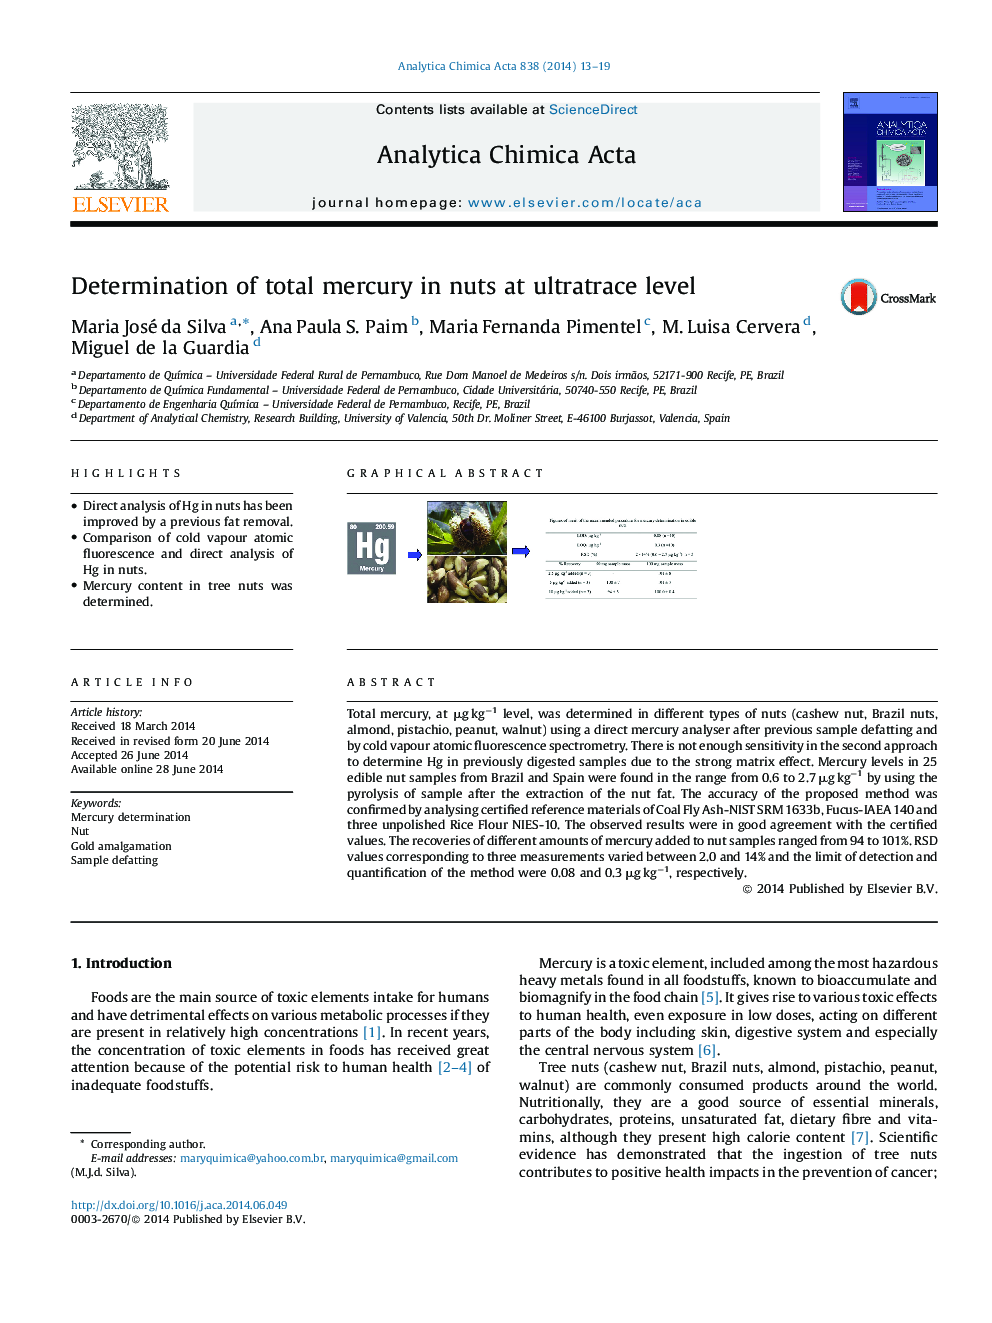 Determination of total mercury in nuts at ultratrace level